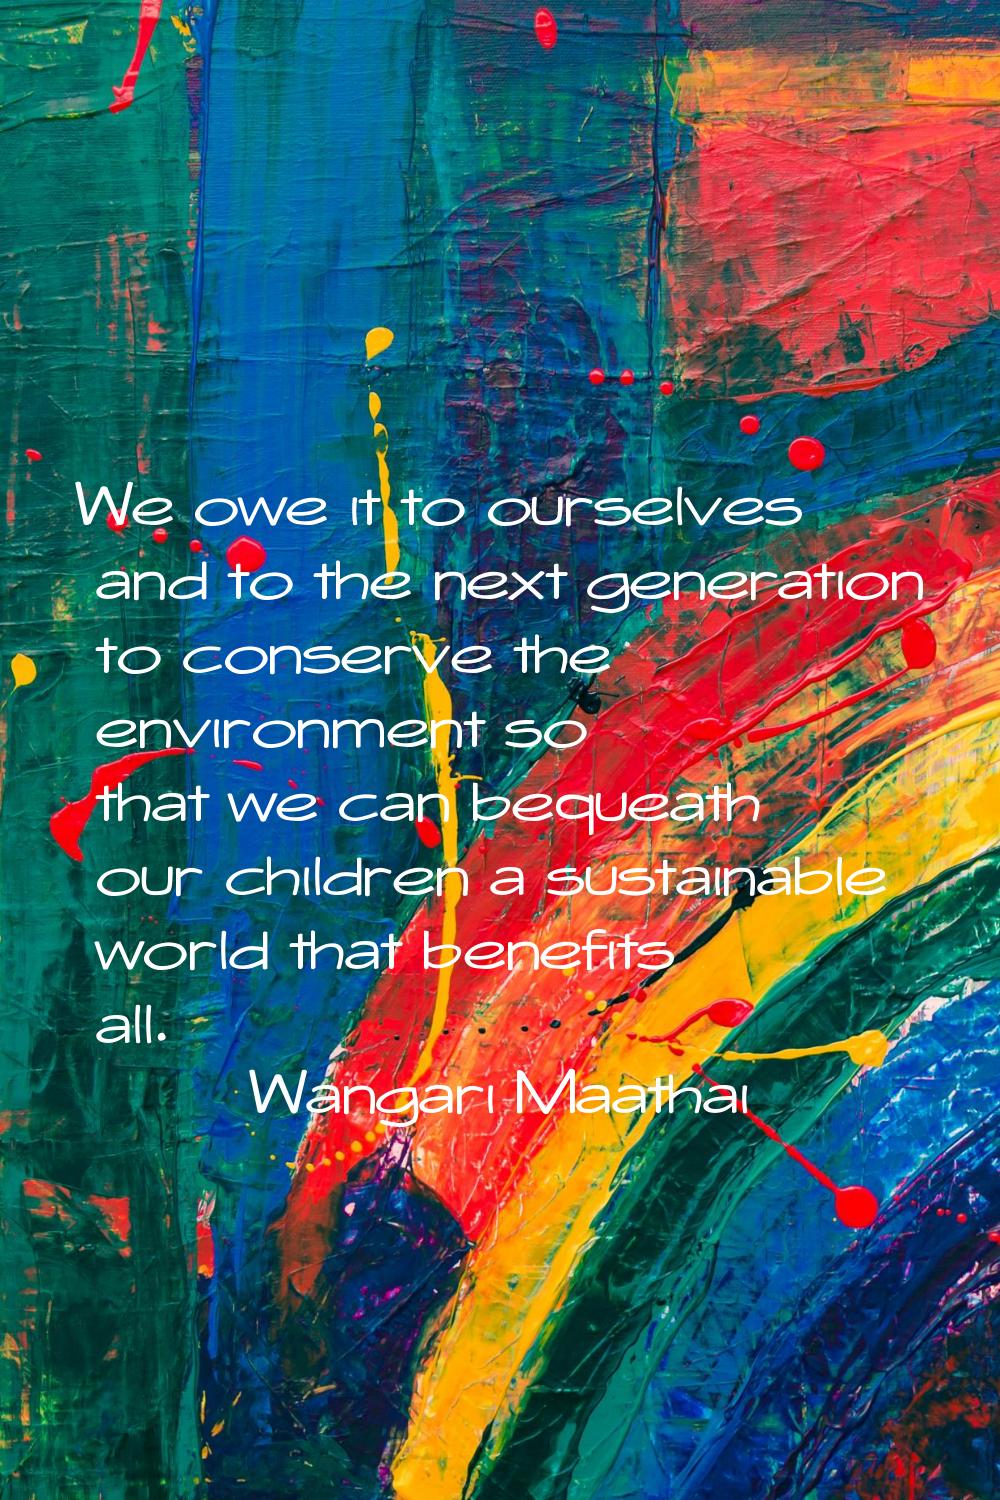 We owe it to ourselves and to the next generation to conserve the environment so that we can bequea